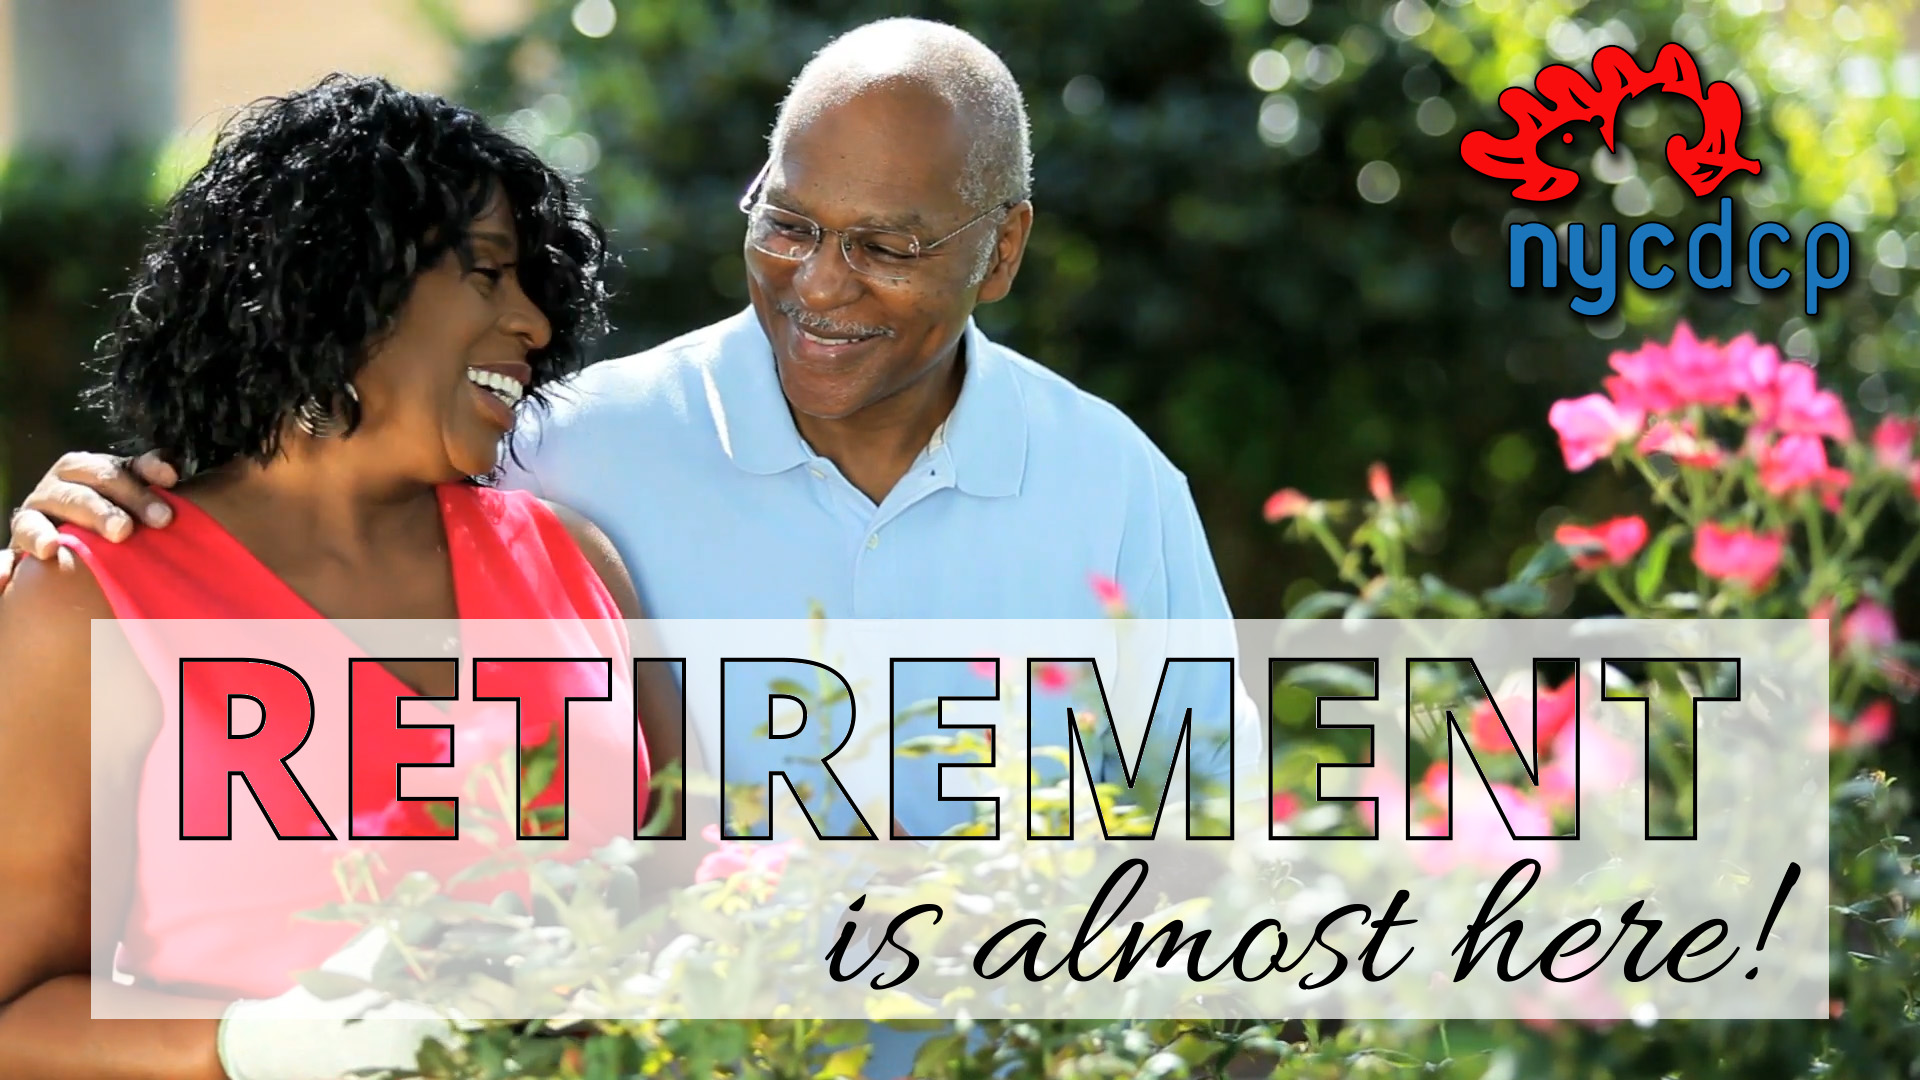 Couple smiling in a garden with the words "Retirement is Almost Here"